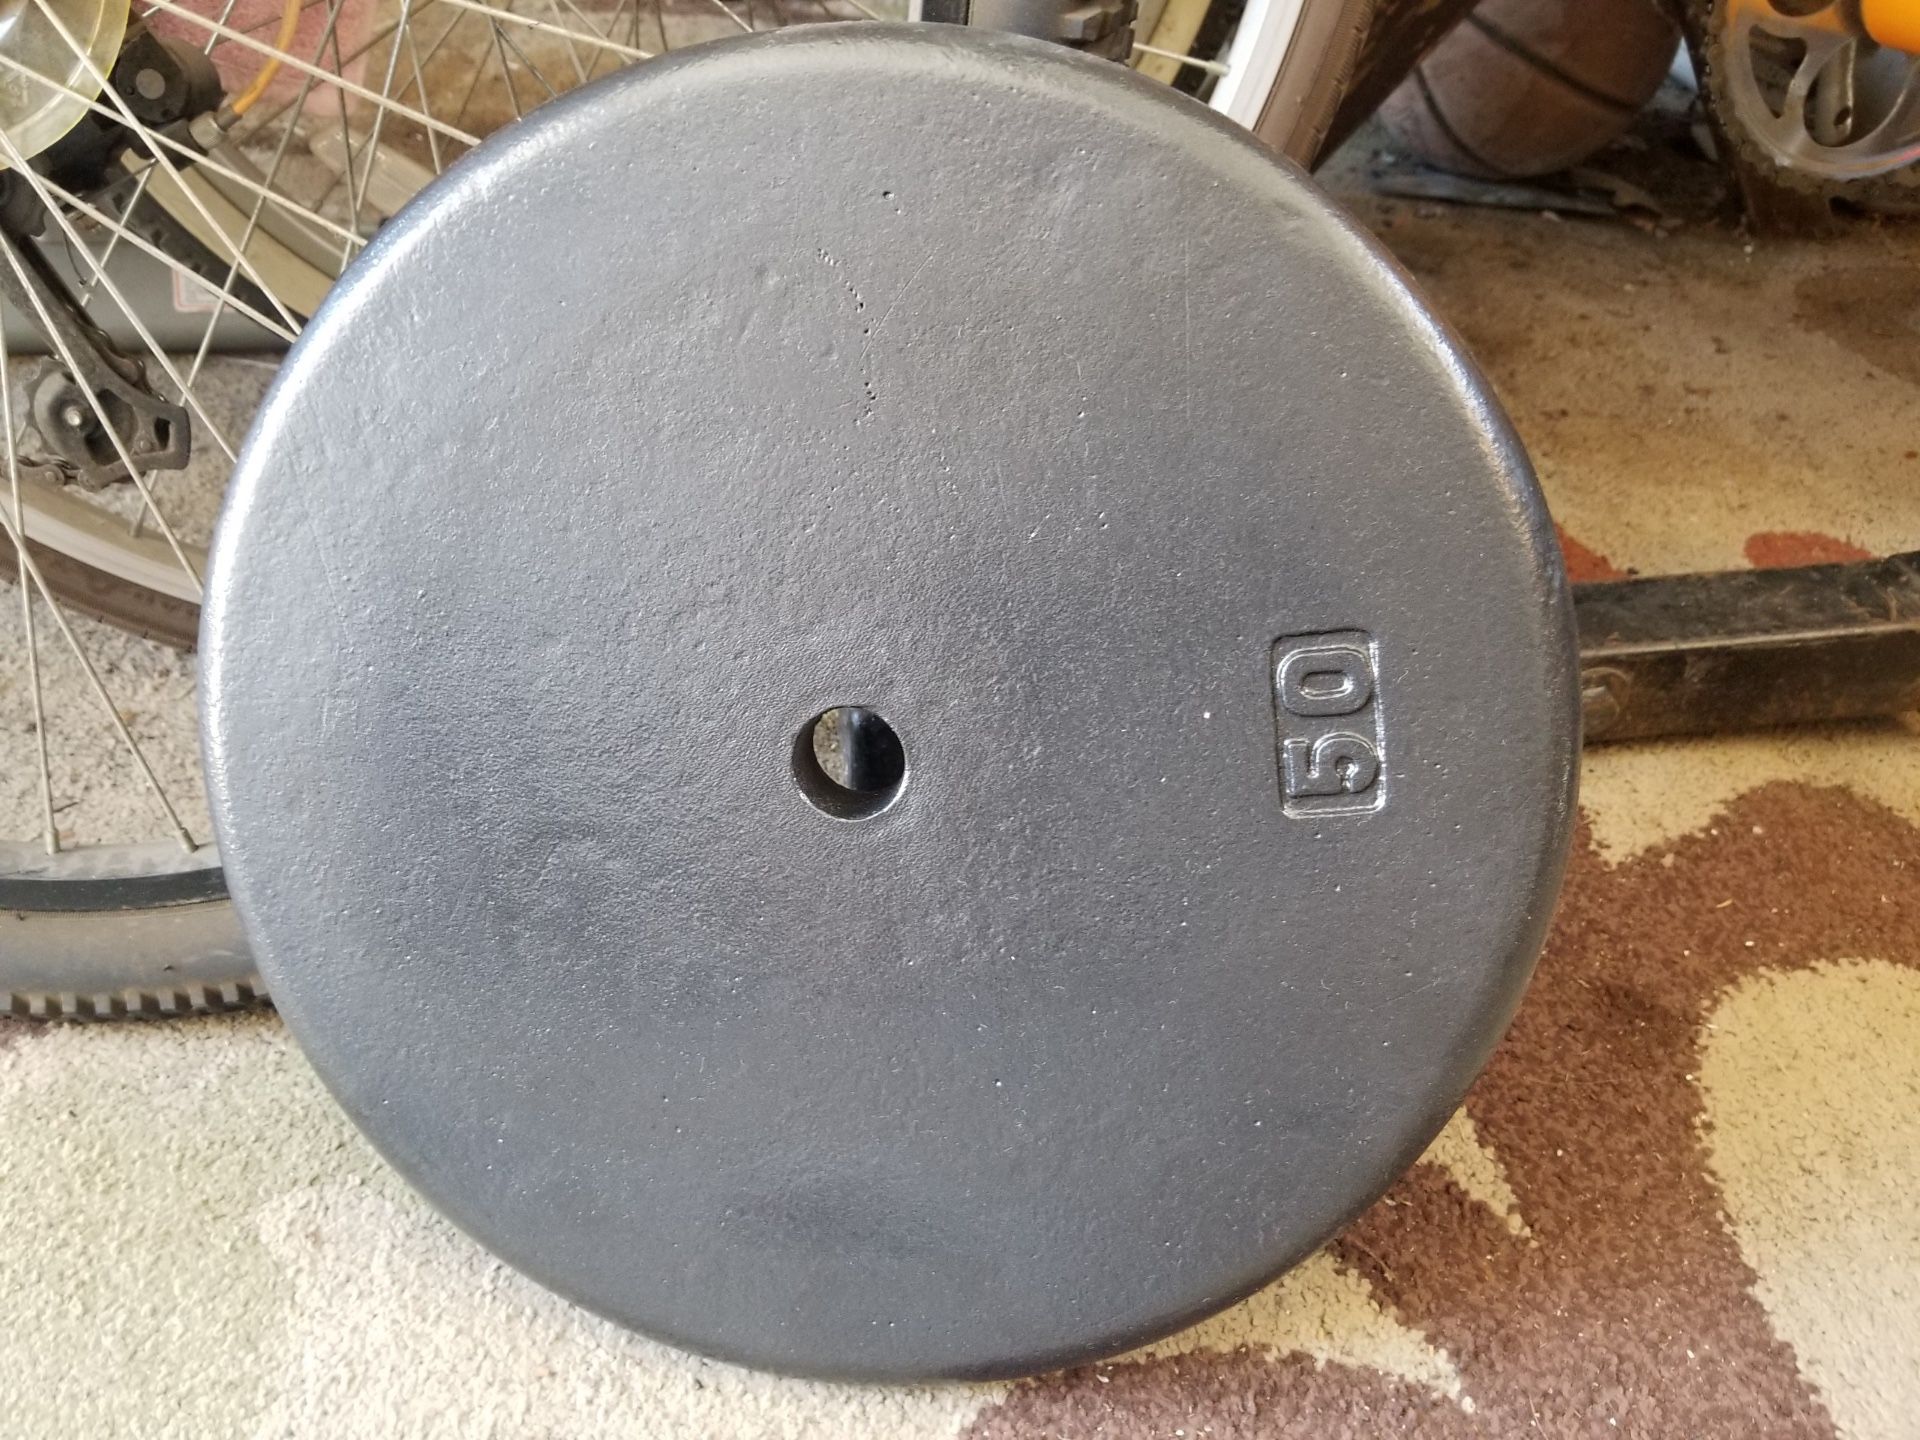 One Standard sized 50lb weight plate